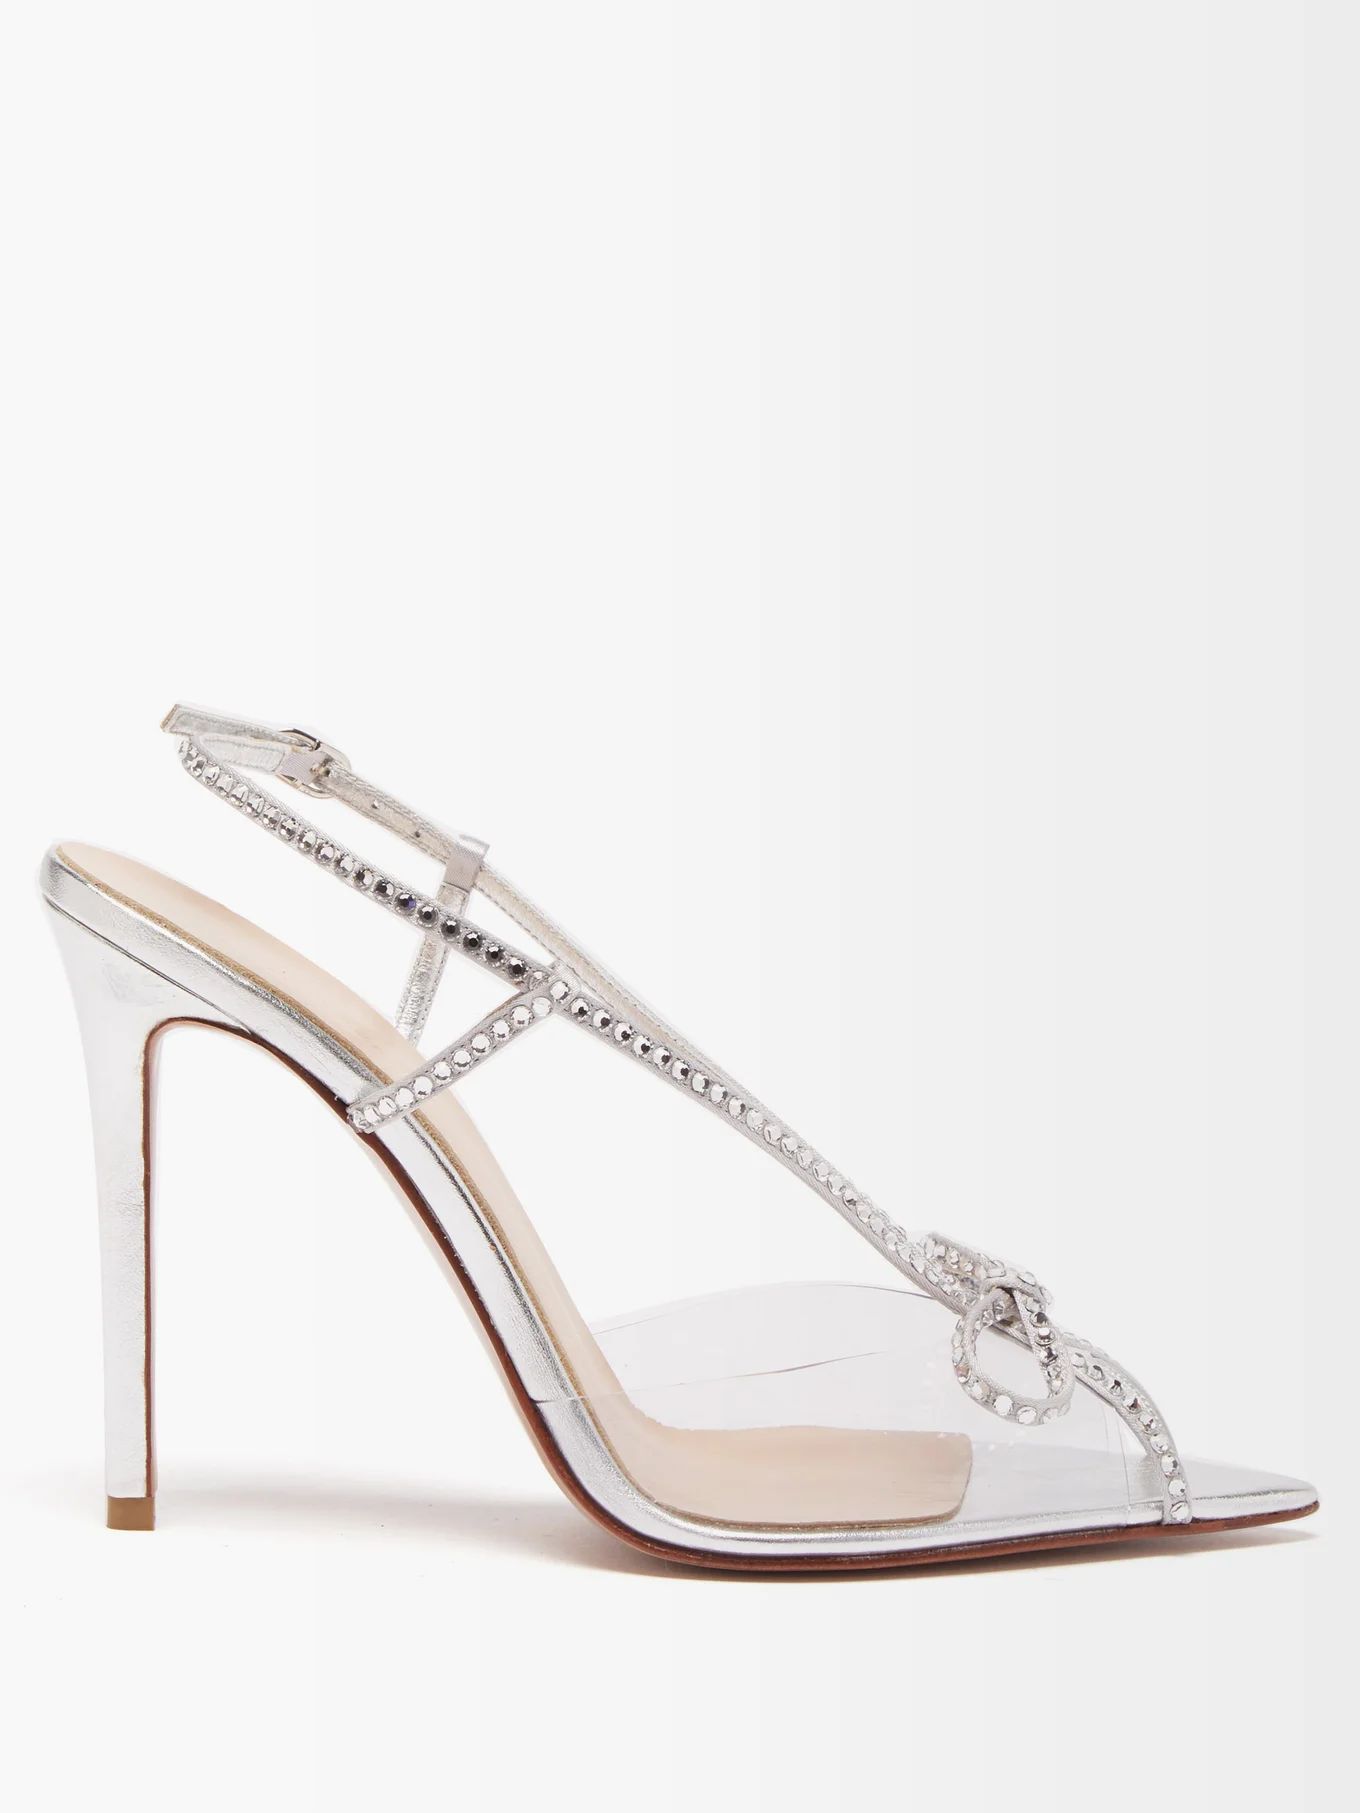 Kay crystal and PVC sandals | Andrea Wazen | Matches (US)